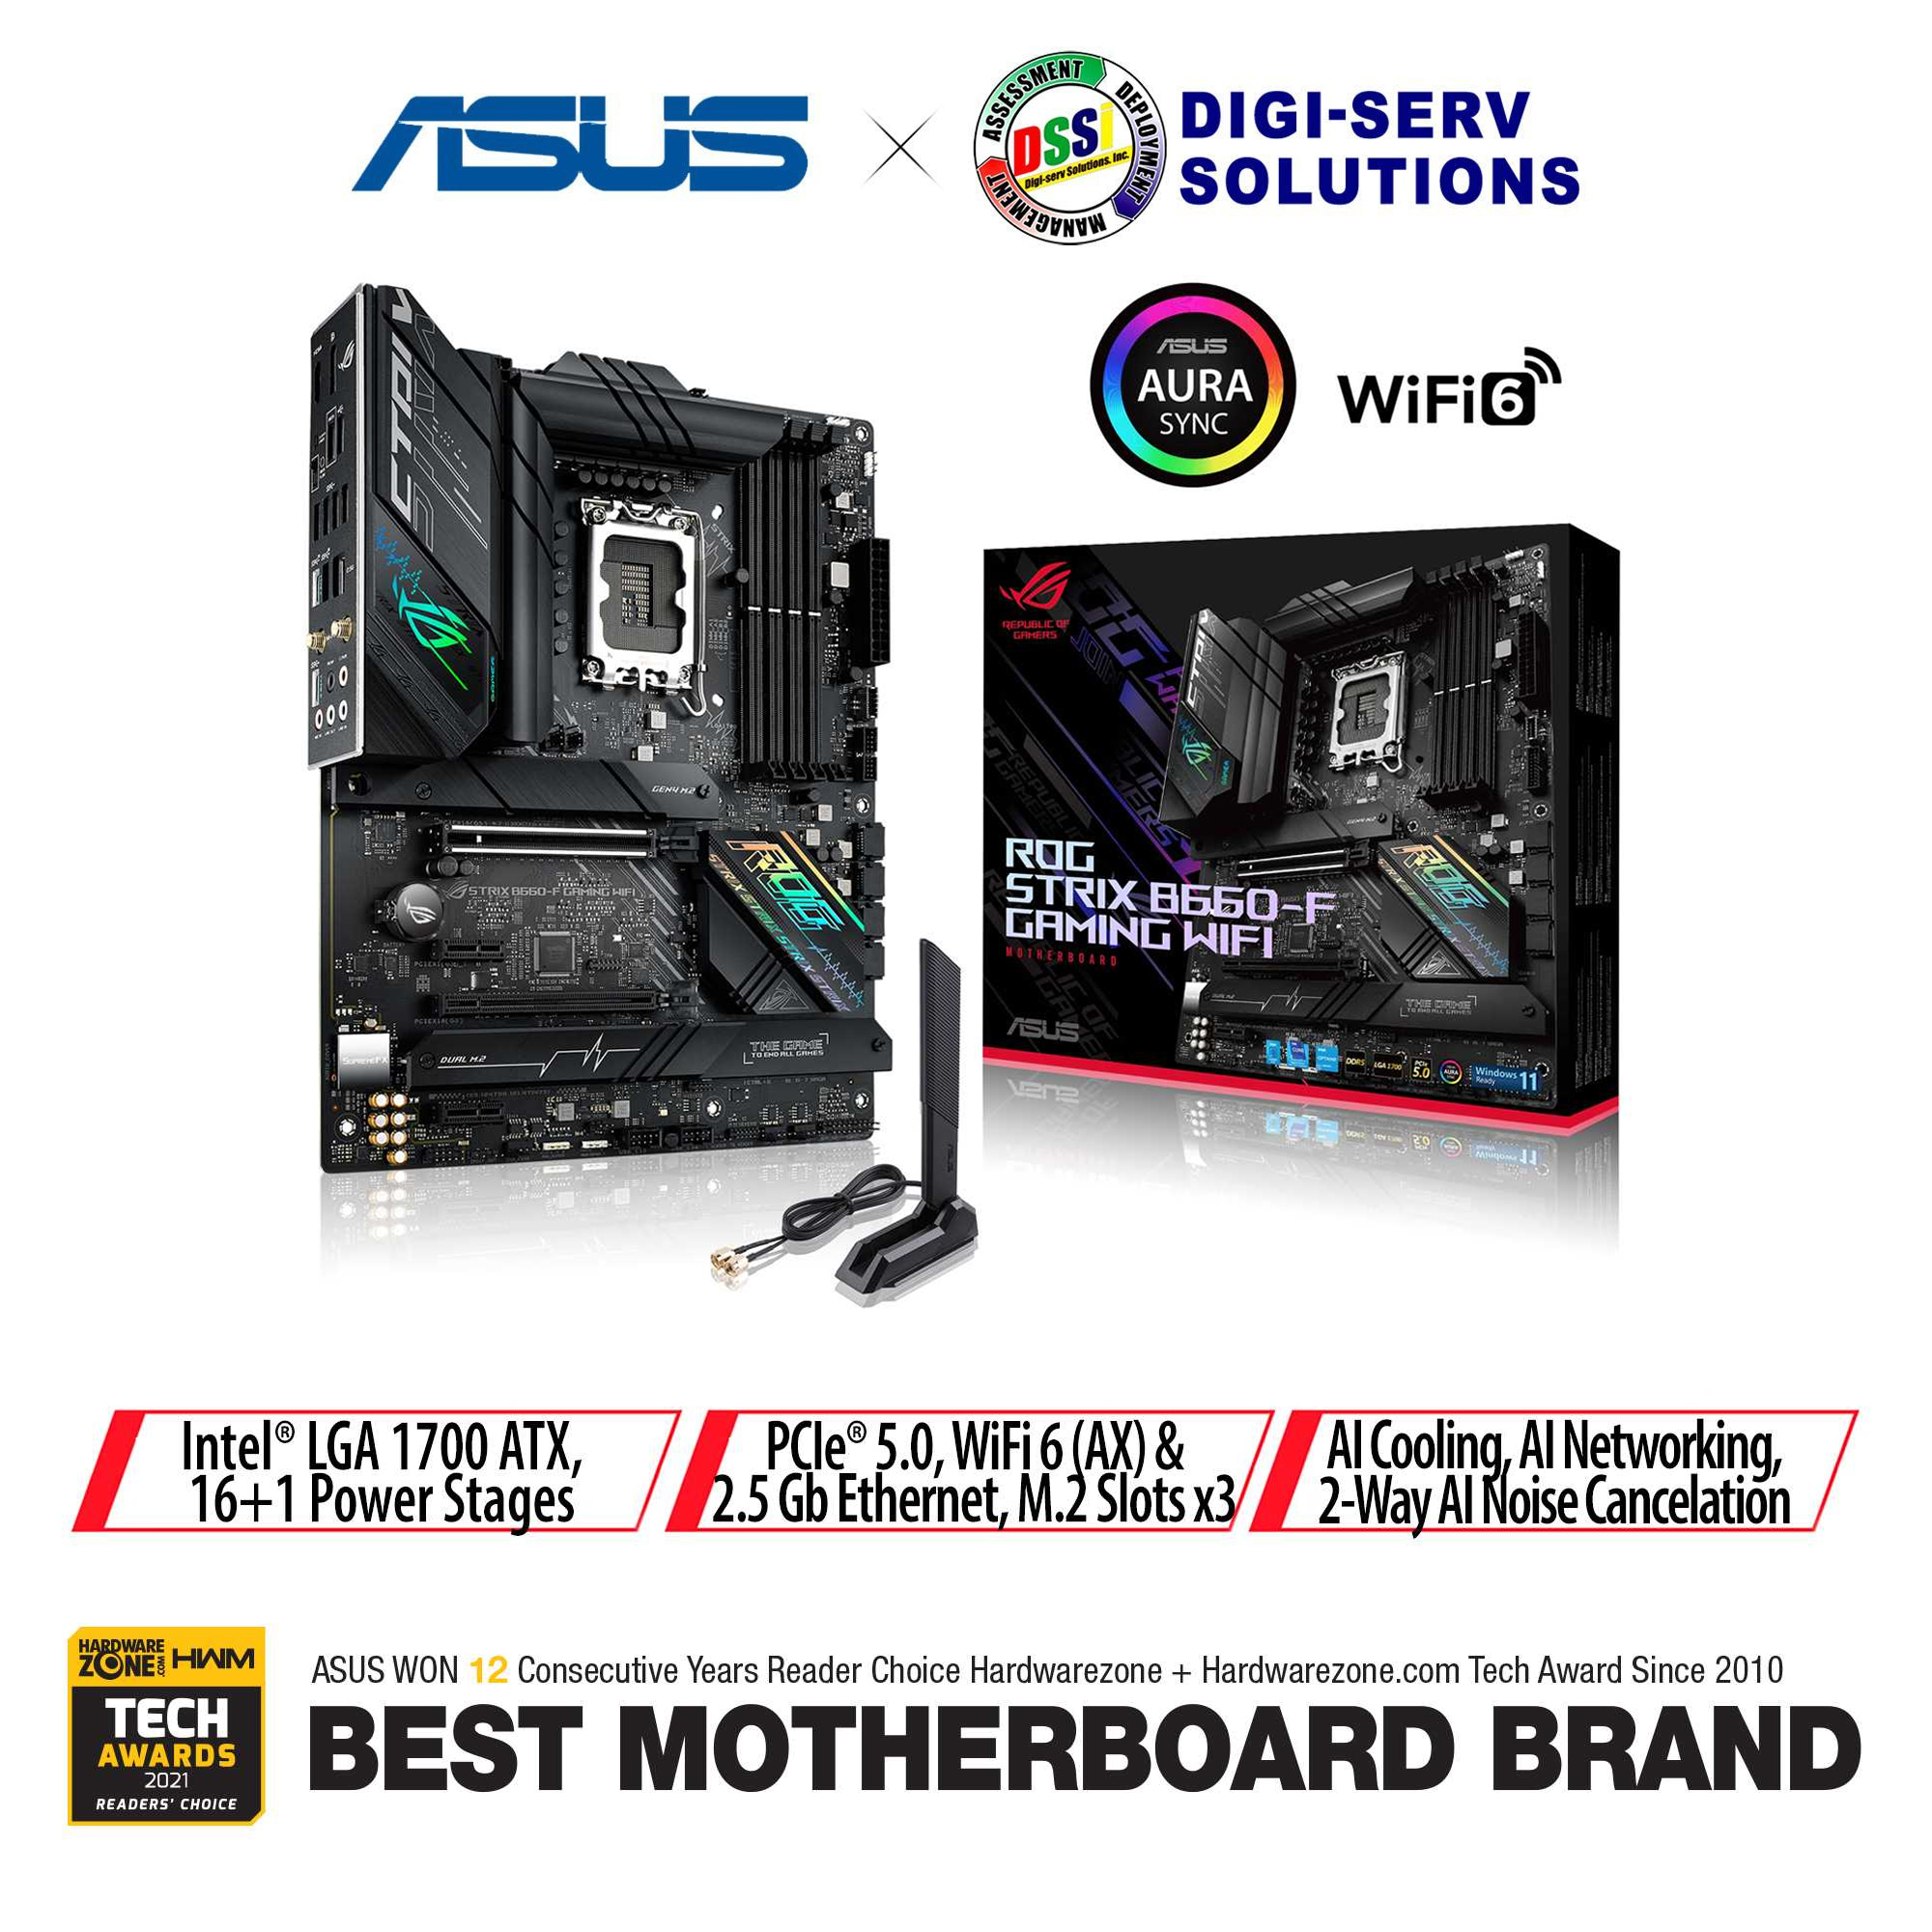 ASUS ROG Strix B660-F Gaming WiFi Intel® LGA 1700 ATX gaming motherboard,  16+1 power stages, DDR5 support, PCIe® 5.0, WiFi 6, 2.5 Gb LAN, three M.2  slots with heatsinks, M.2 backplates, and